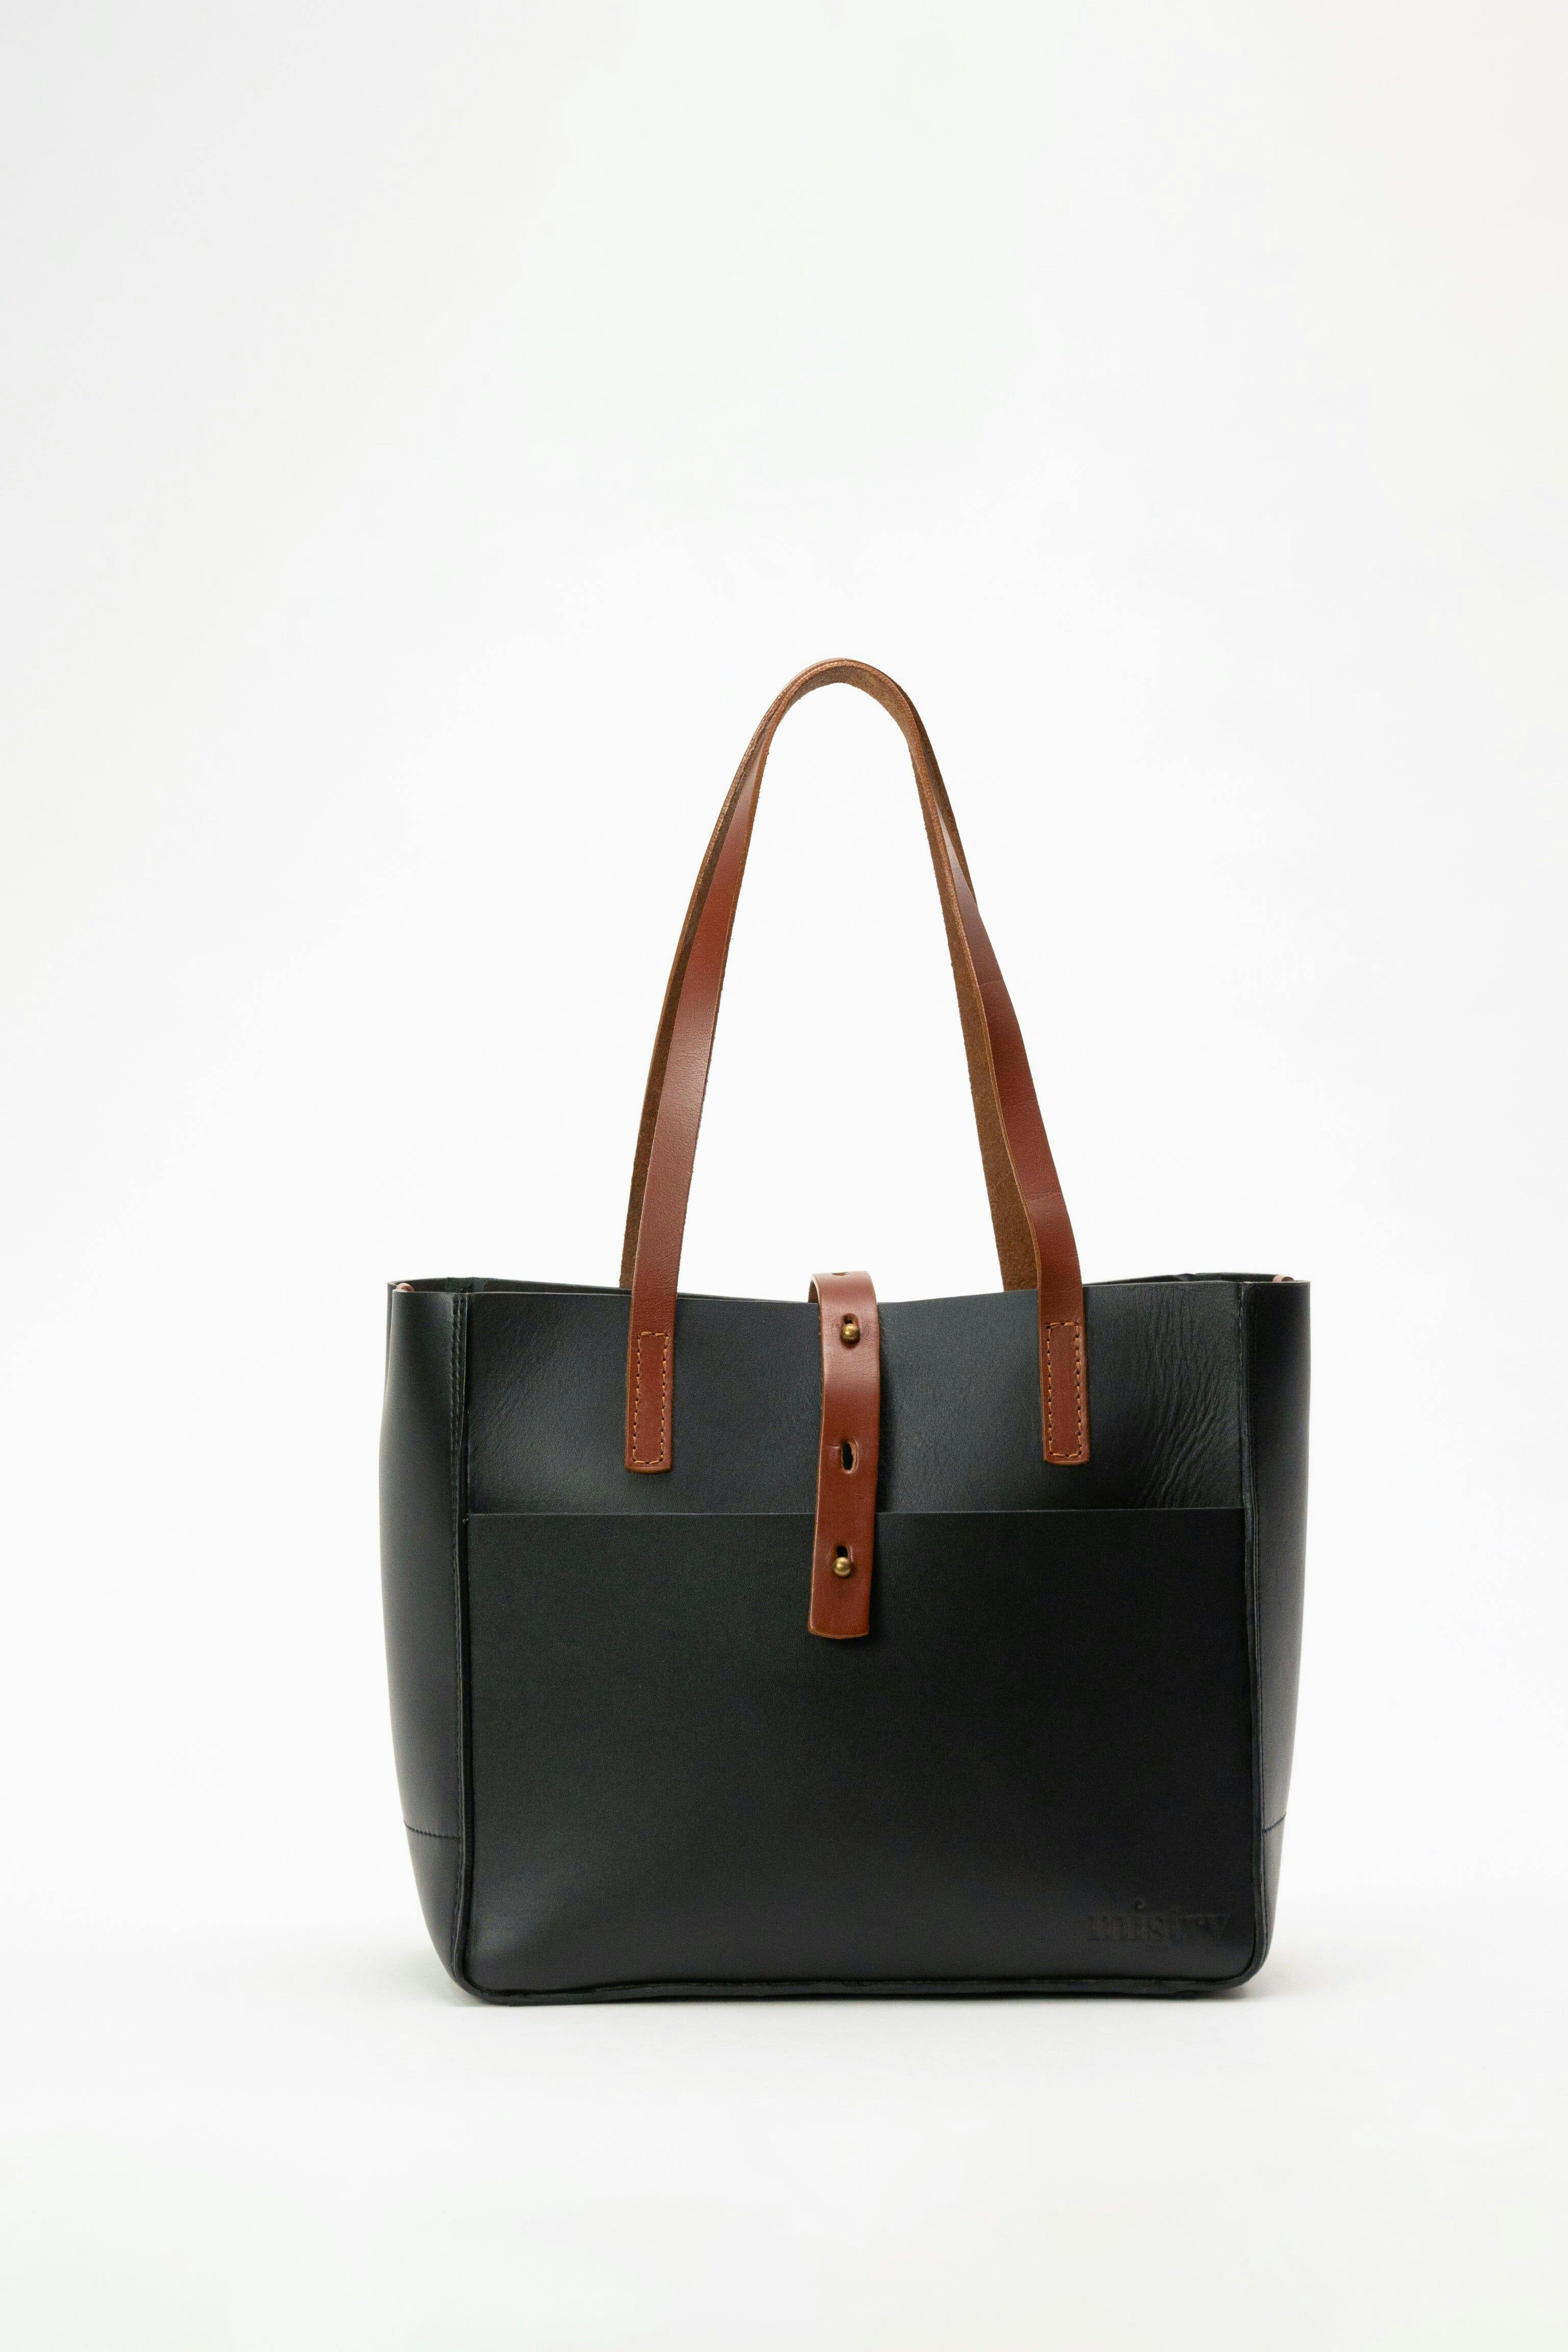 Decker Tote in Black & Tan, a product by Mistry 